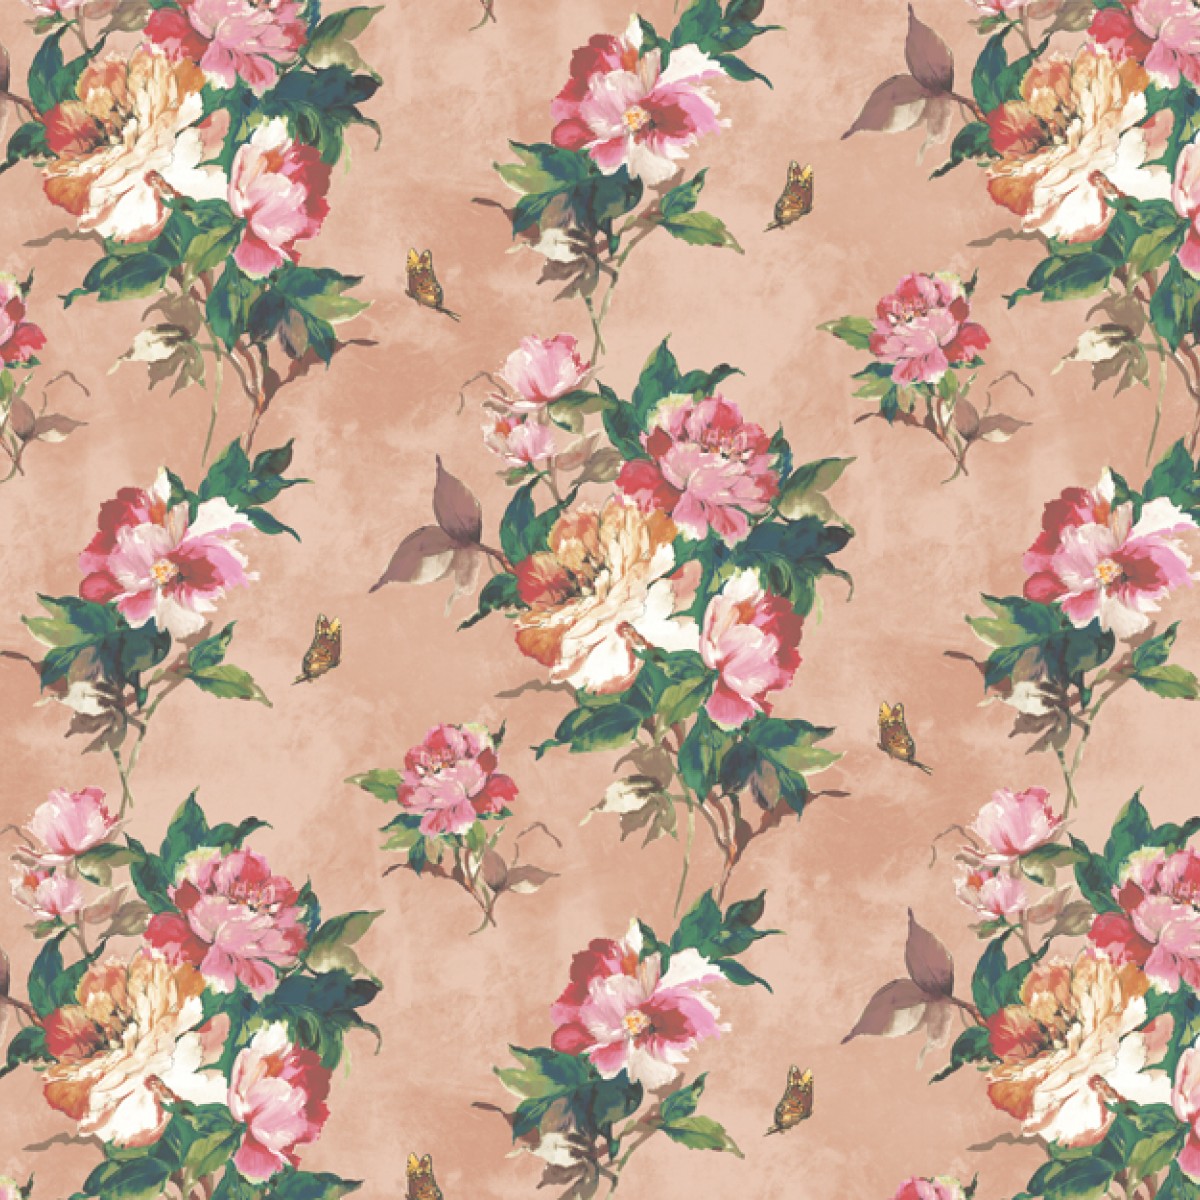 Tapet Madama Butterfly, Coral Rose Luxury Floral, 1838 Wallcoverings, 5.3mp / rola, Tapet living 